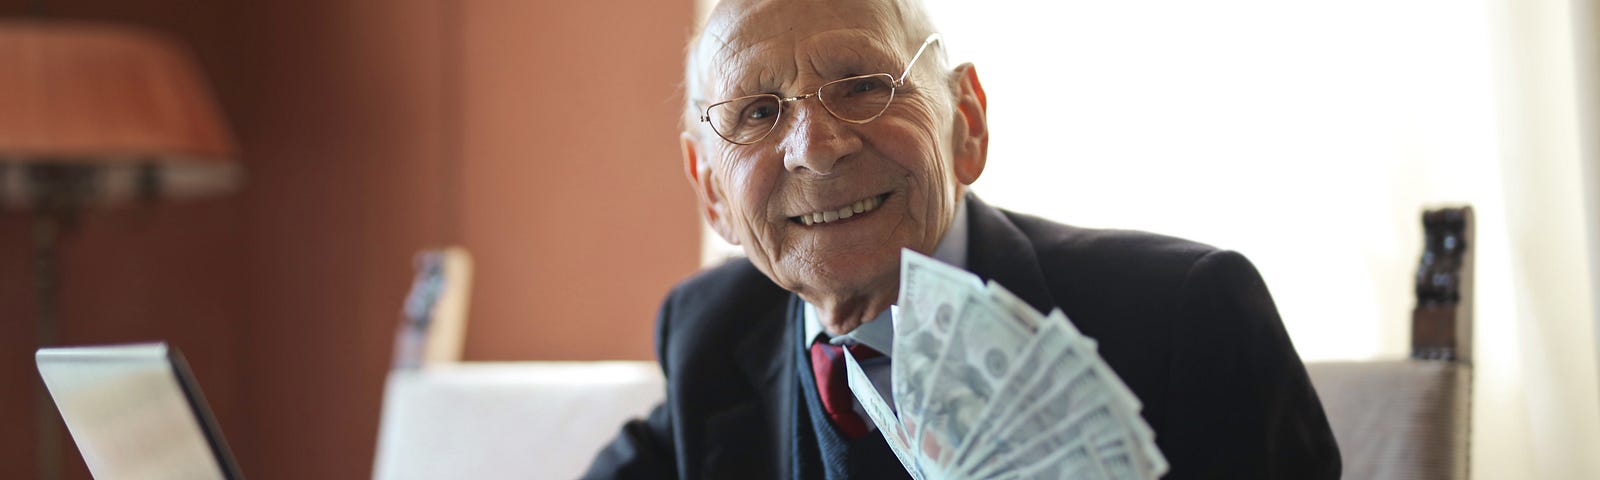 happy old man dressed in nice suit holding stack of money 100 dollar bills and sitting next to a computer